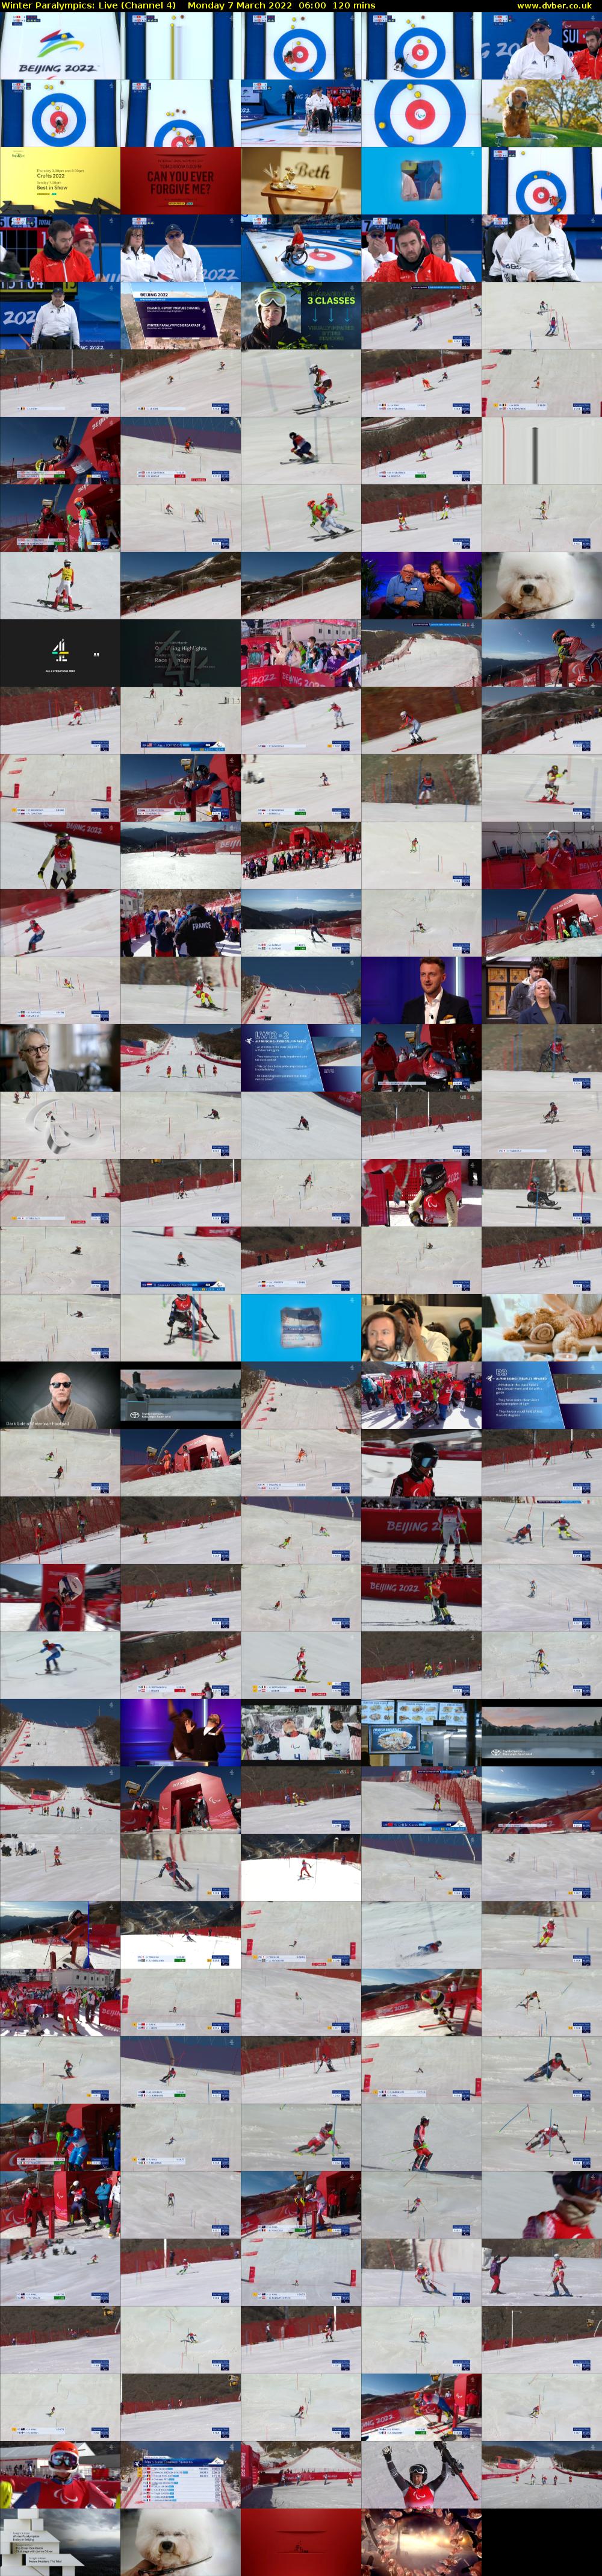 Winter Paralympics: Live (Channel 4) Monday 7 March 2022 06:00 - 08:00